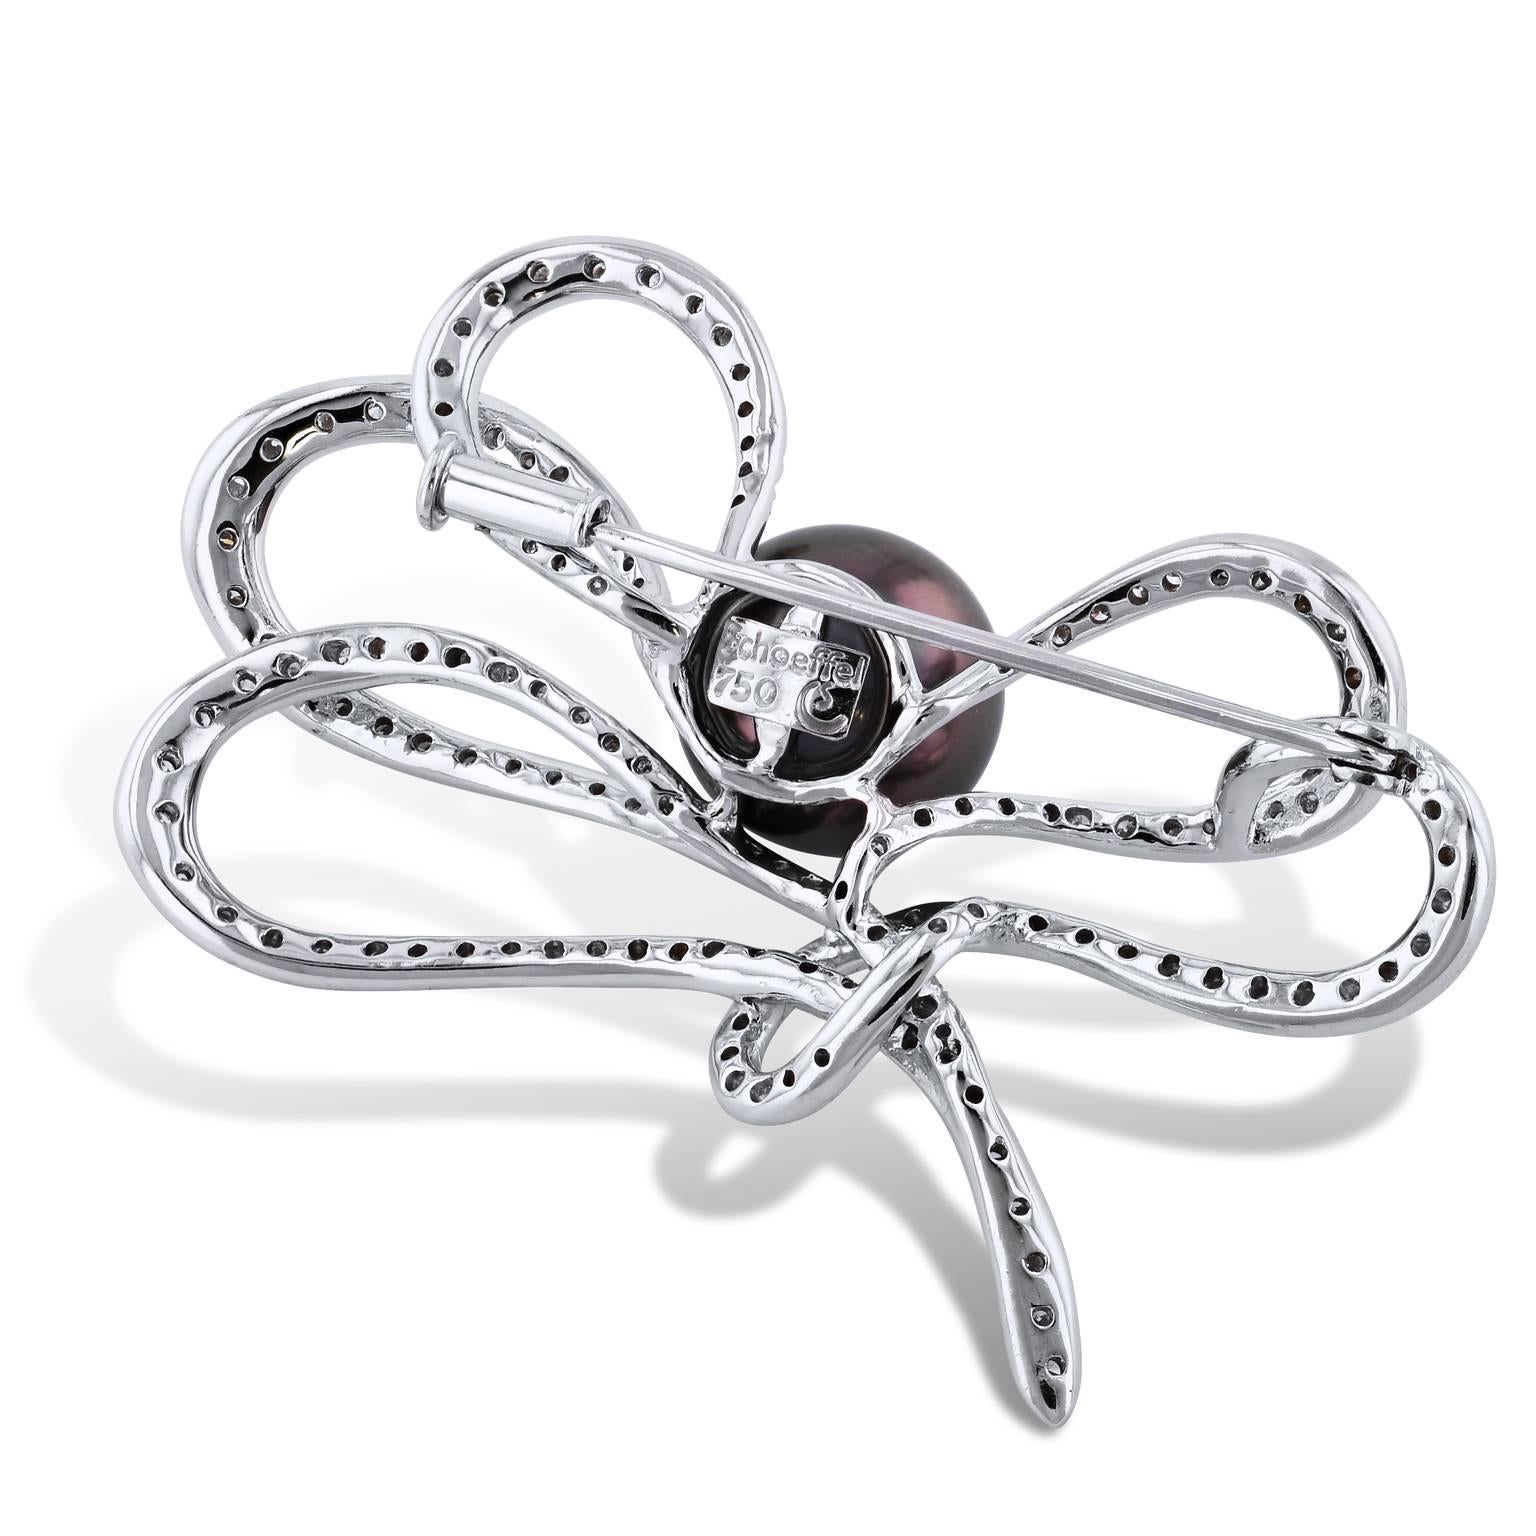 Enjoy this previously loved 18 karat white gold pin in dragonfly design featuring 0.85 carat to 1.00 carat of pave-set diamond and a colored pearl (stamped Schoeffel).